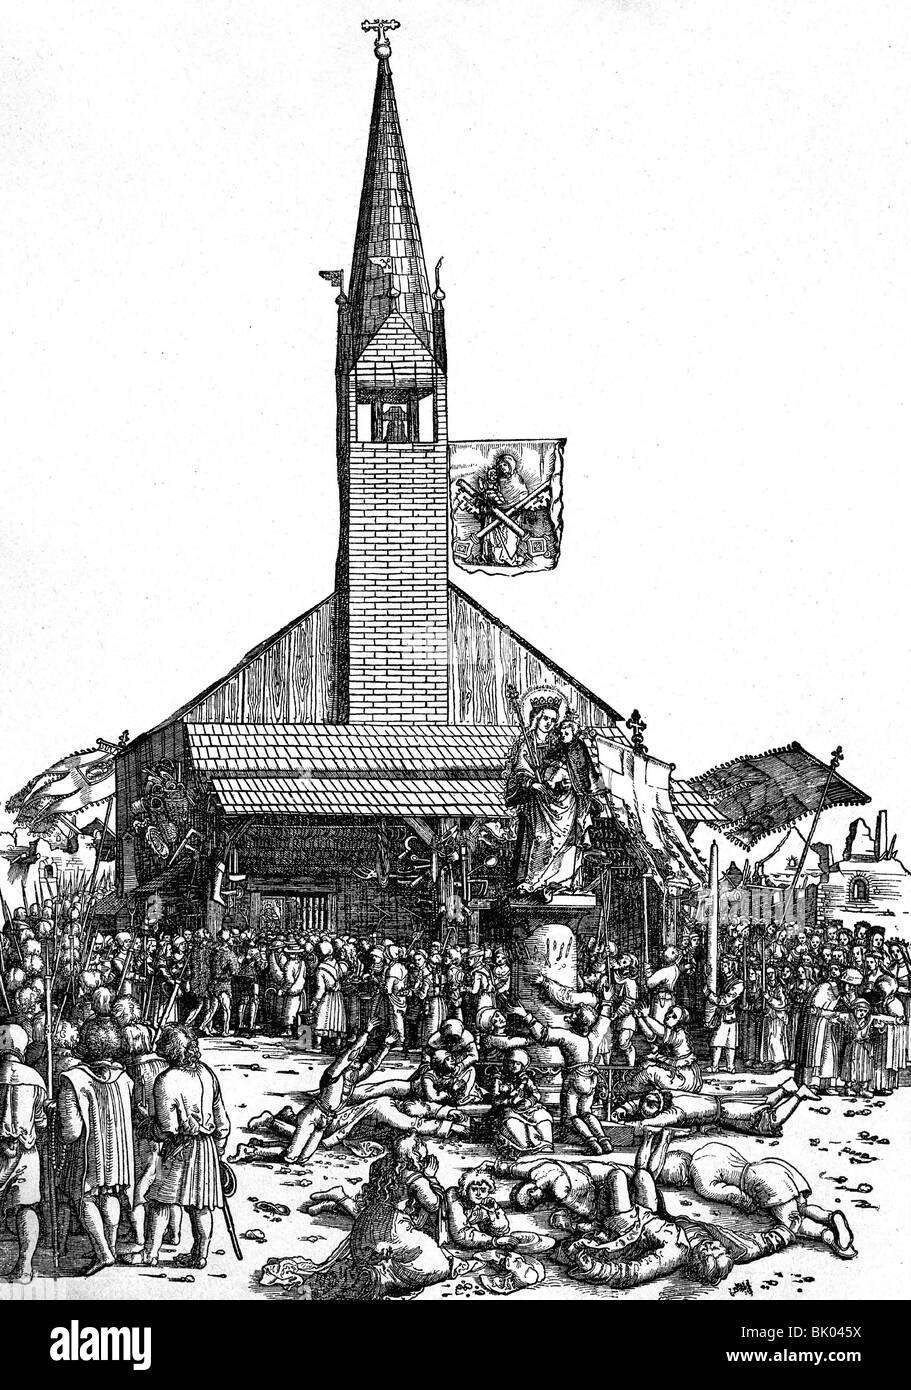 religion, Christianity, customs, pilgrimage, procession of pilgrims to the statue of Holy Mary in Regensburg, praying for help against the plague, woodcut by Michael Ostendorfer (circa 1494 - 1559), Middle Ages, flag, believers, epidemic, epidemics, pandemic disease, diseases, tower, historic, historical, church, medieval, people, Stock Photo